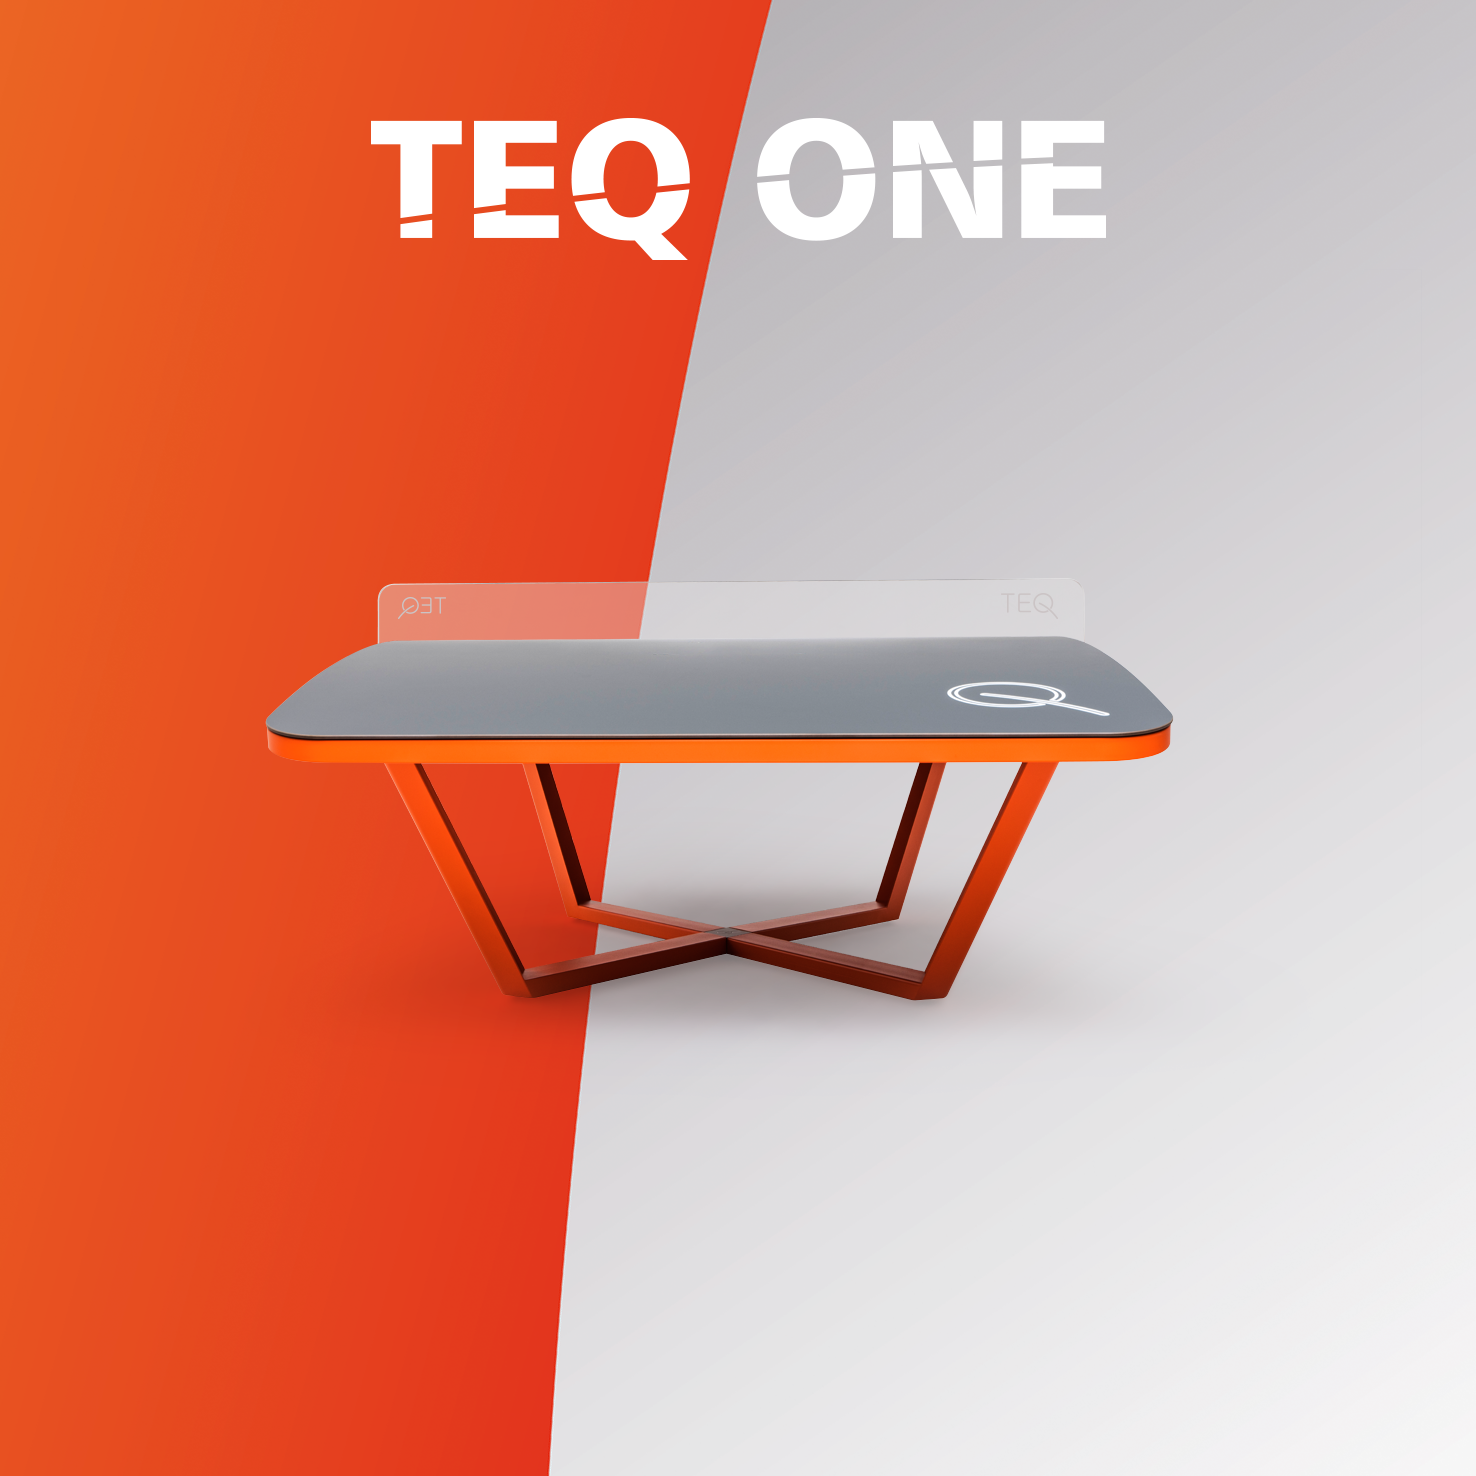 TEQ™ ONE